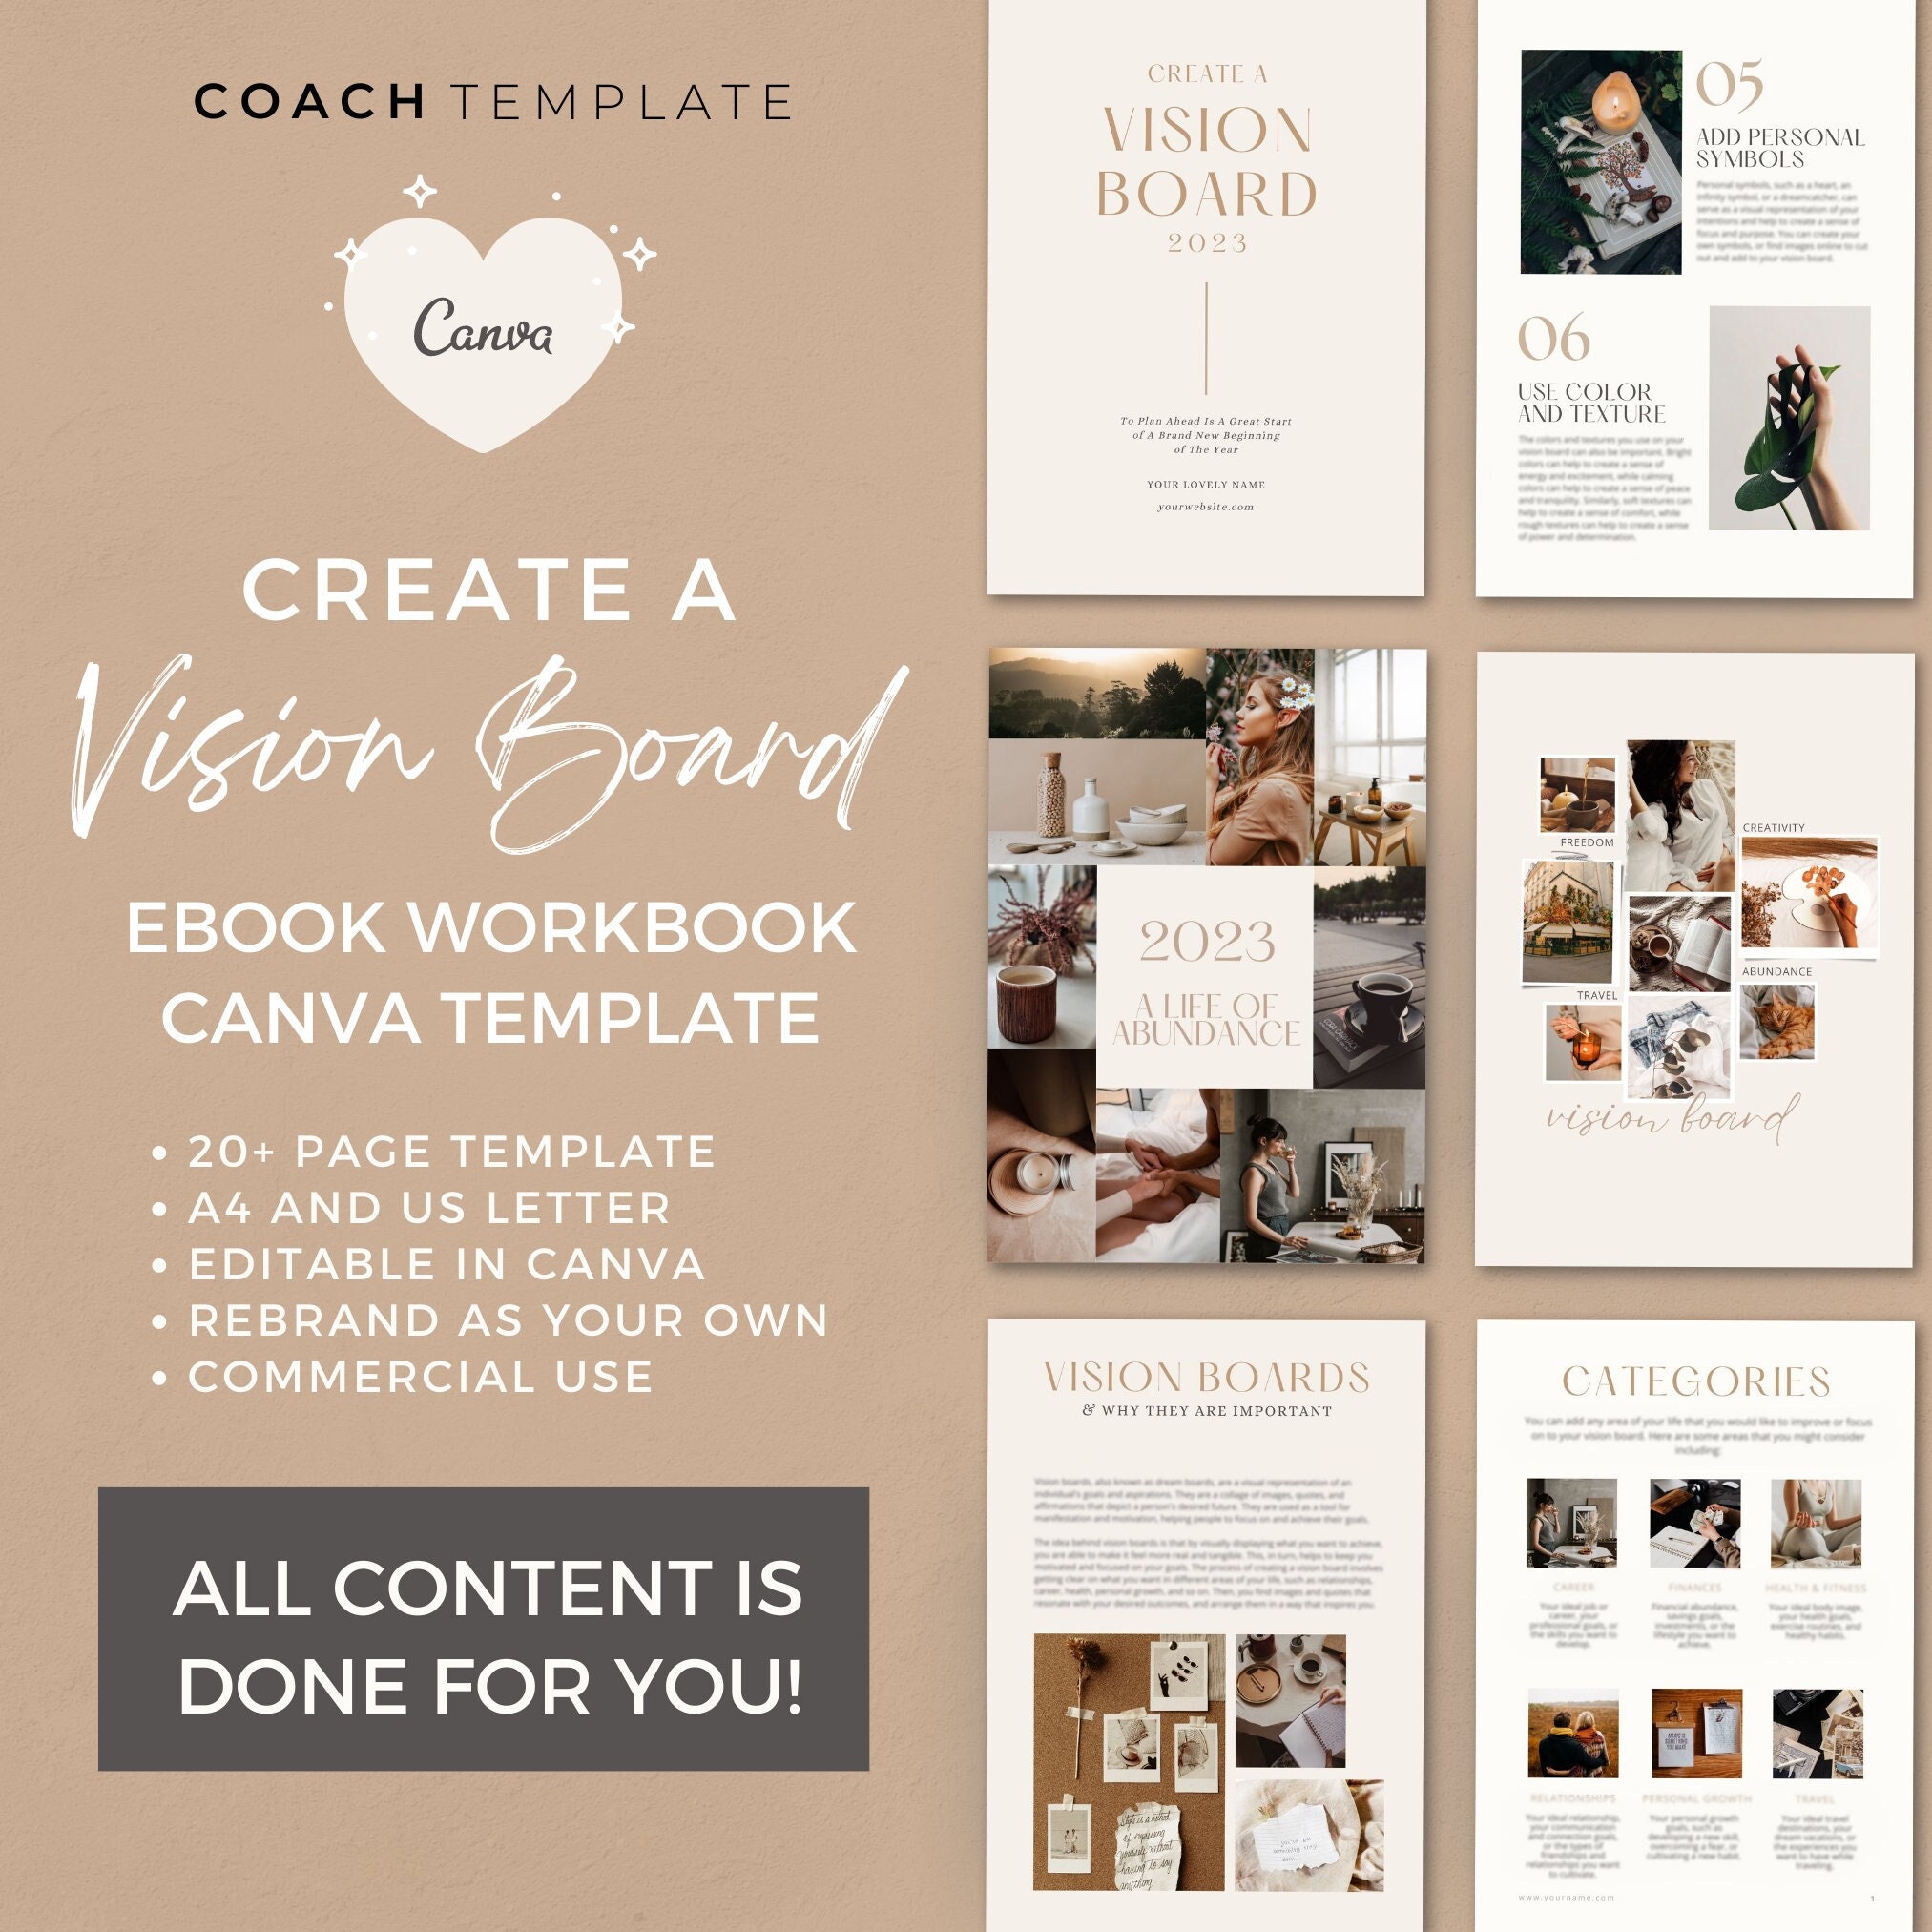 Free Period Press Vision Board Book, 700+ Words & Images in All Categories, for Visualizing Your Life Goals & Dreams, Playful